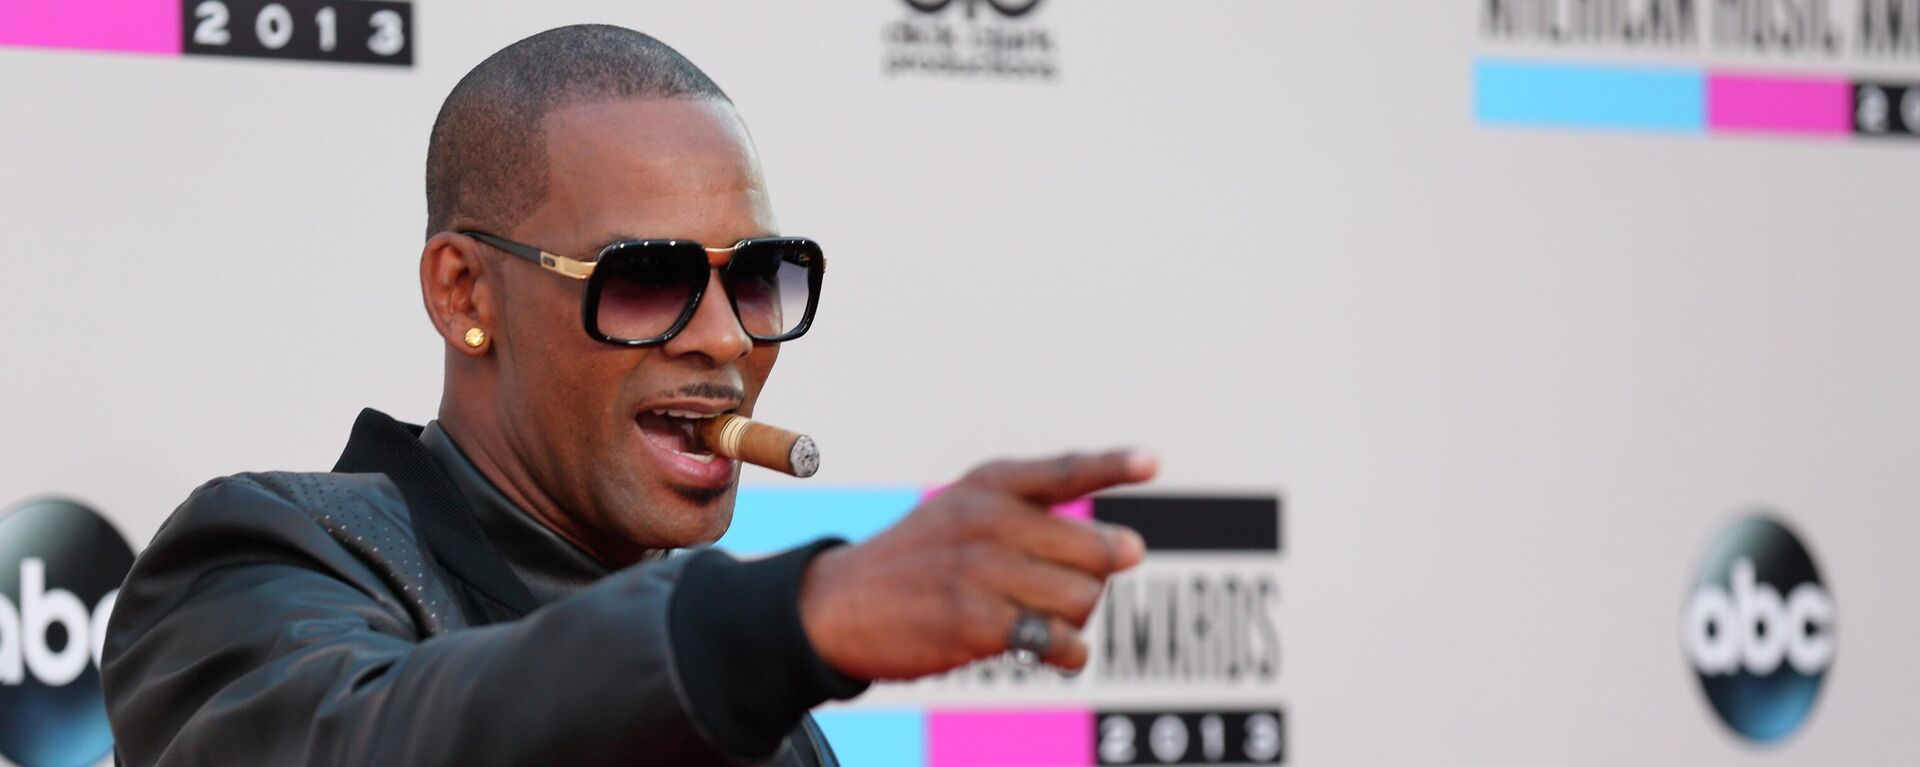 FILE - In this Sunday, Nov. 24, 2013, file photo, R. Kelly arrives at the 2013 American Music Awards, in Los Angeles. A federal jury in New York convicted the R&B superstar Monday, Sept. 27, 2021, in a sex trafficking trial - Sputnik International, 1920, 06.10.2021